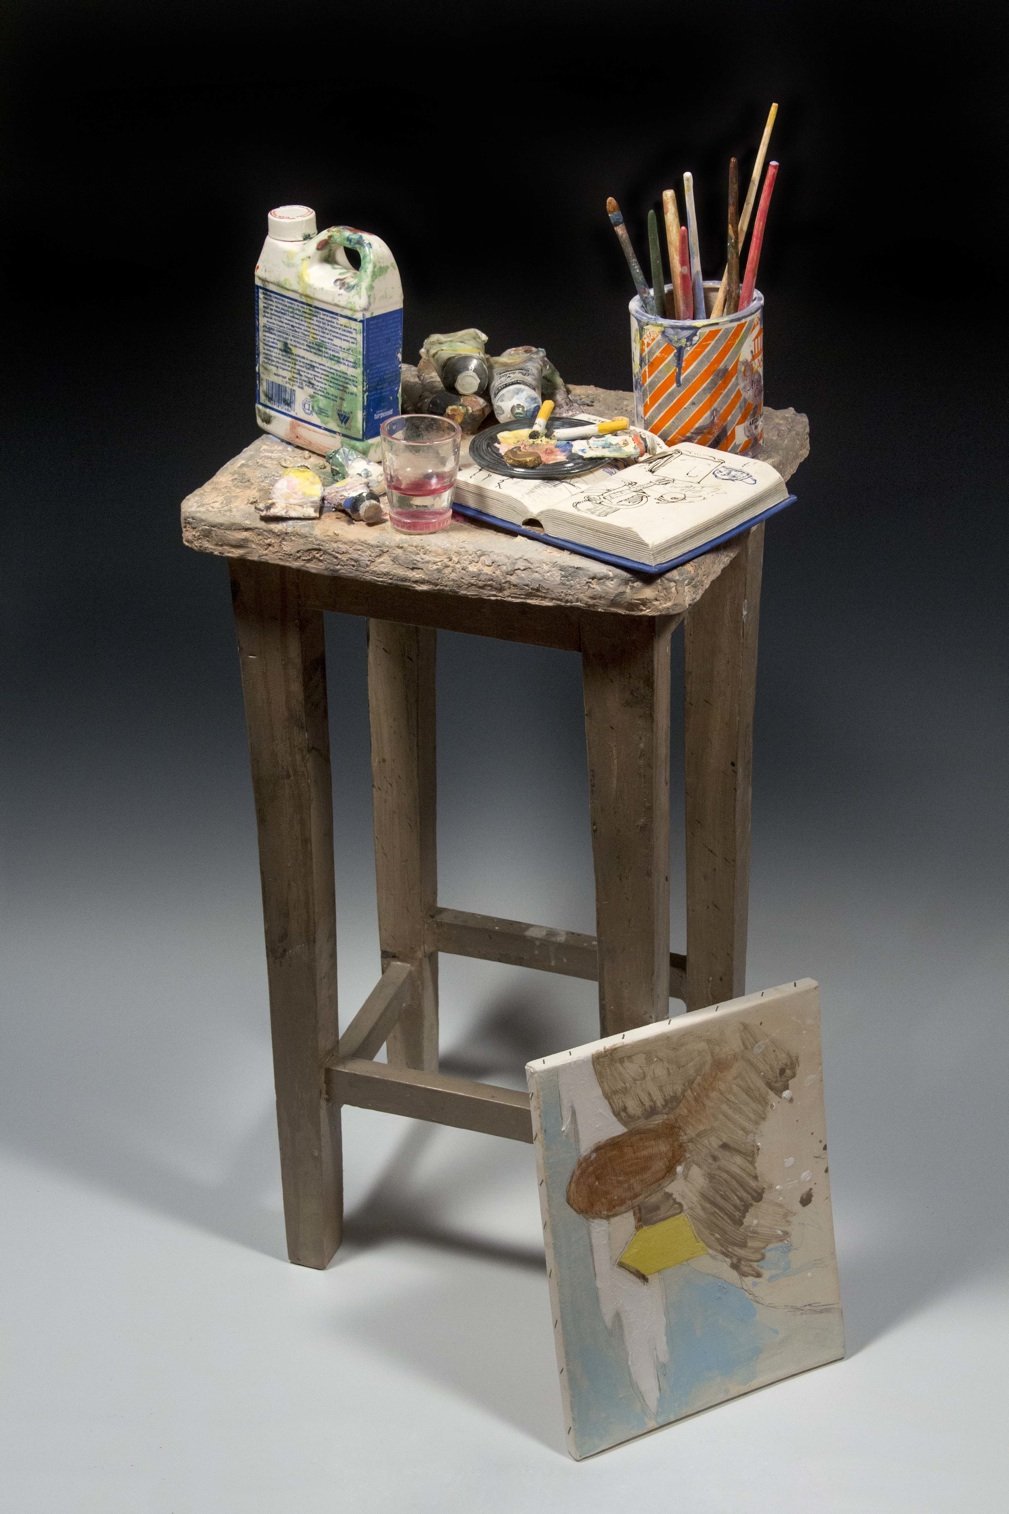 Richard Shaw  Painter's Table with Unfinished Painting, 37" x 20" x 15", glaze porcelain with overglaze decals